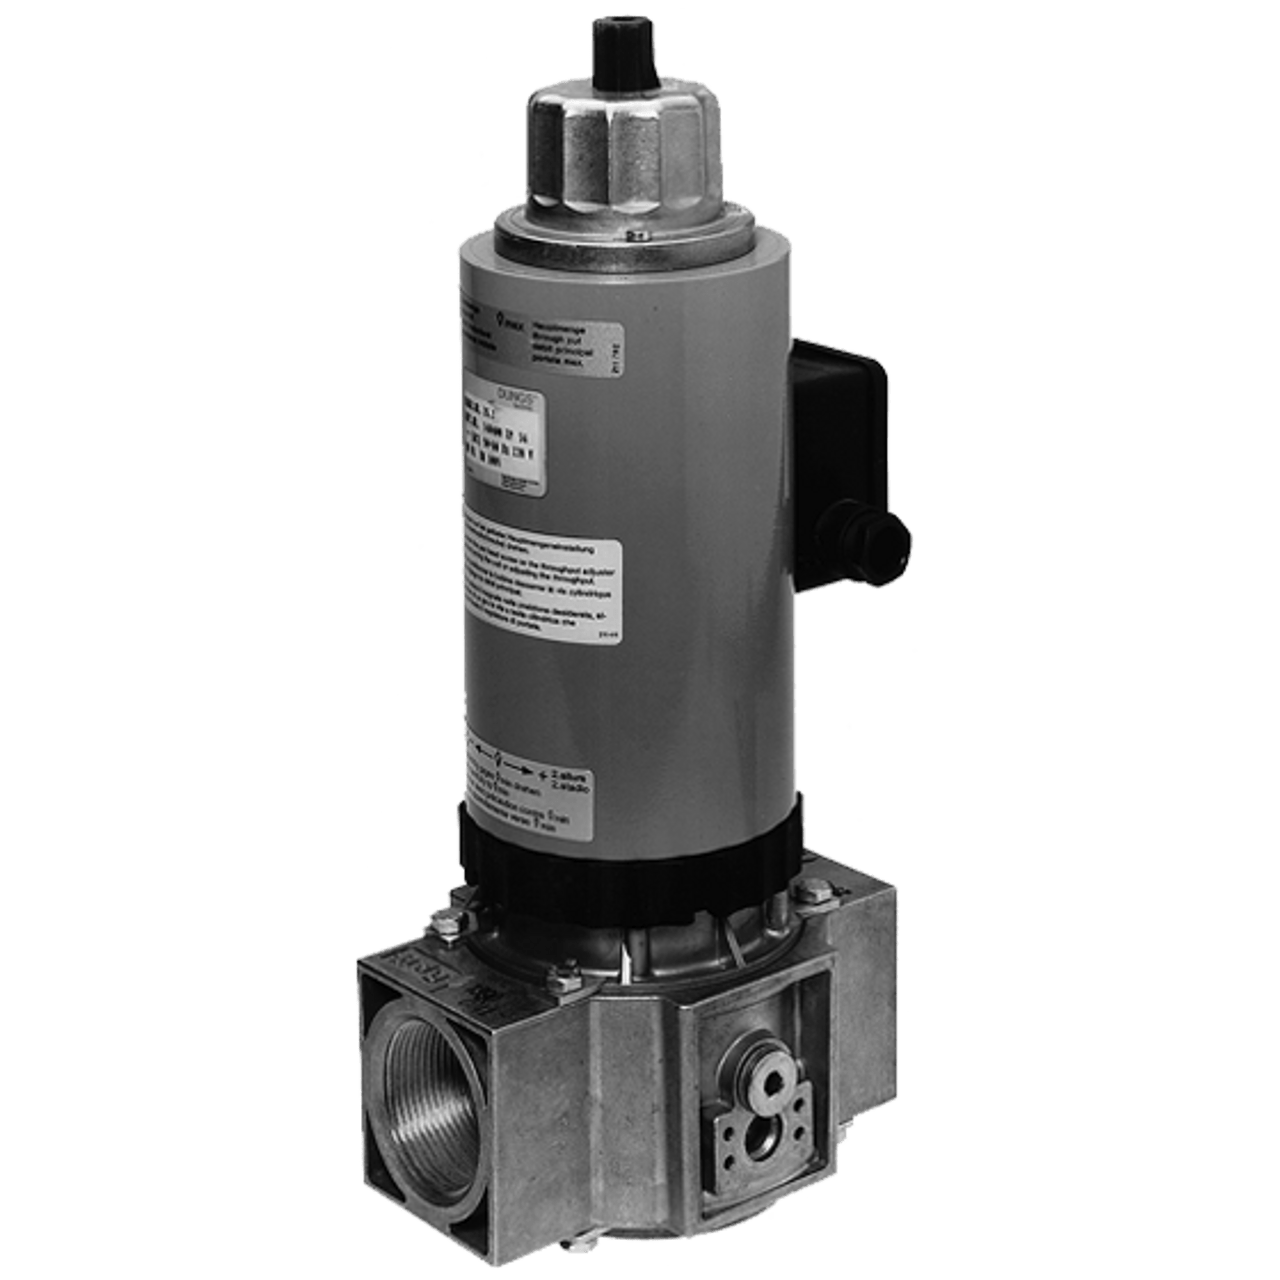 ZRLE 420/5 Magnetic Gas Valve 110083